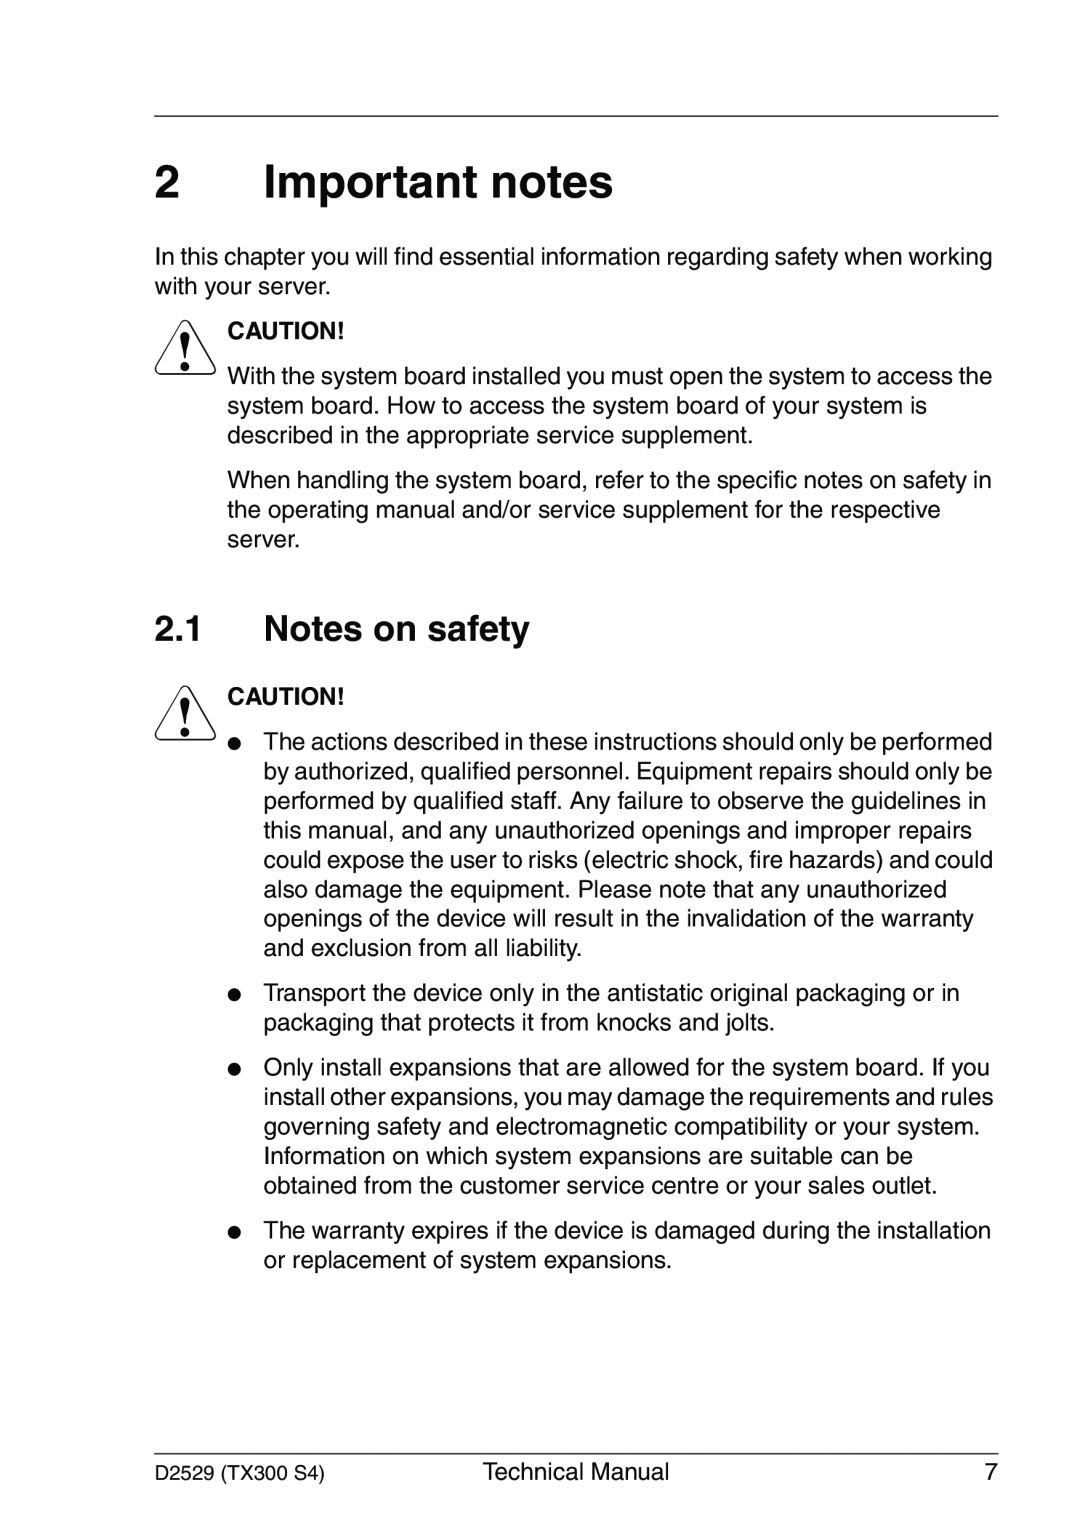 Fujitsu D2529 technical manual Important notes, Notes on safety, V Caution 